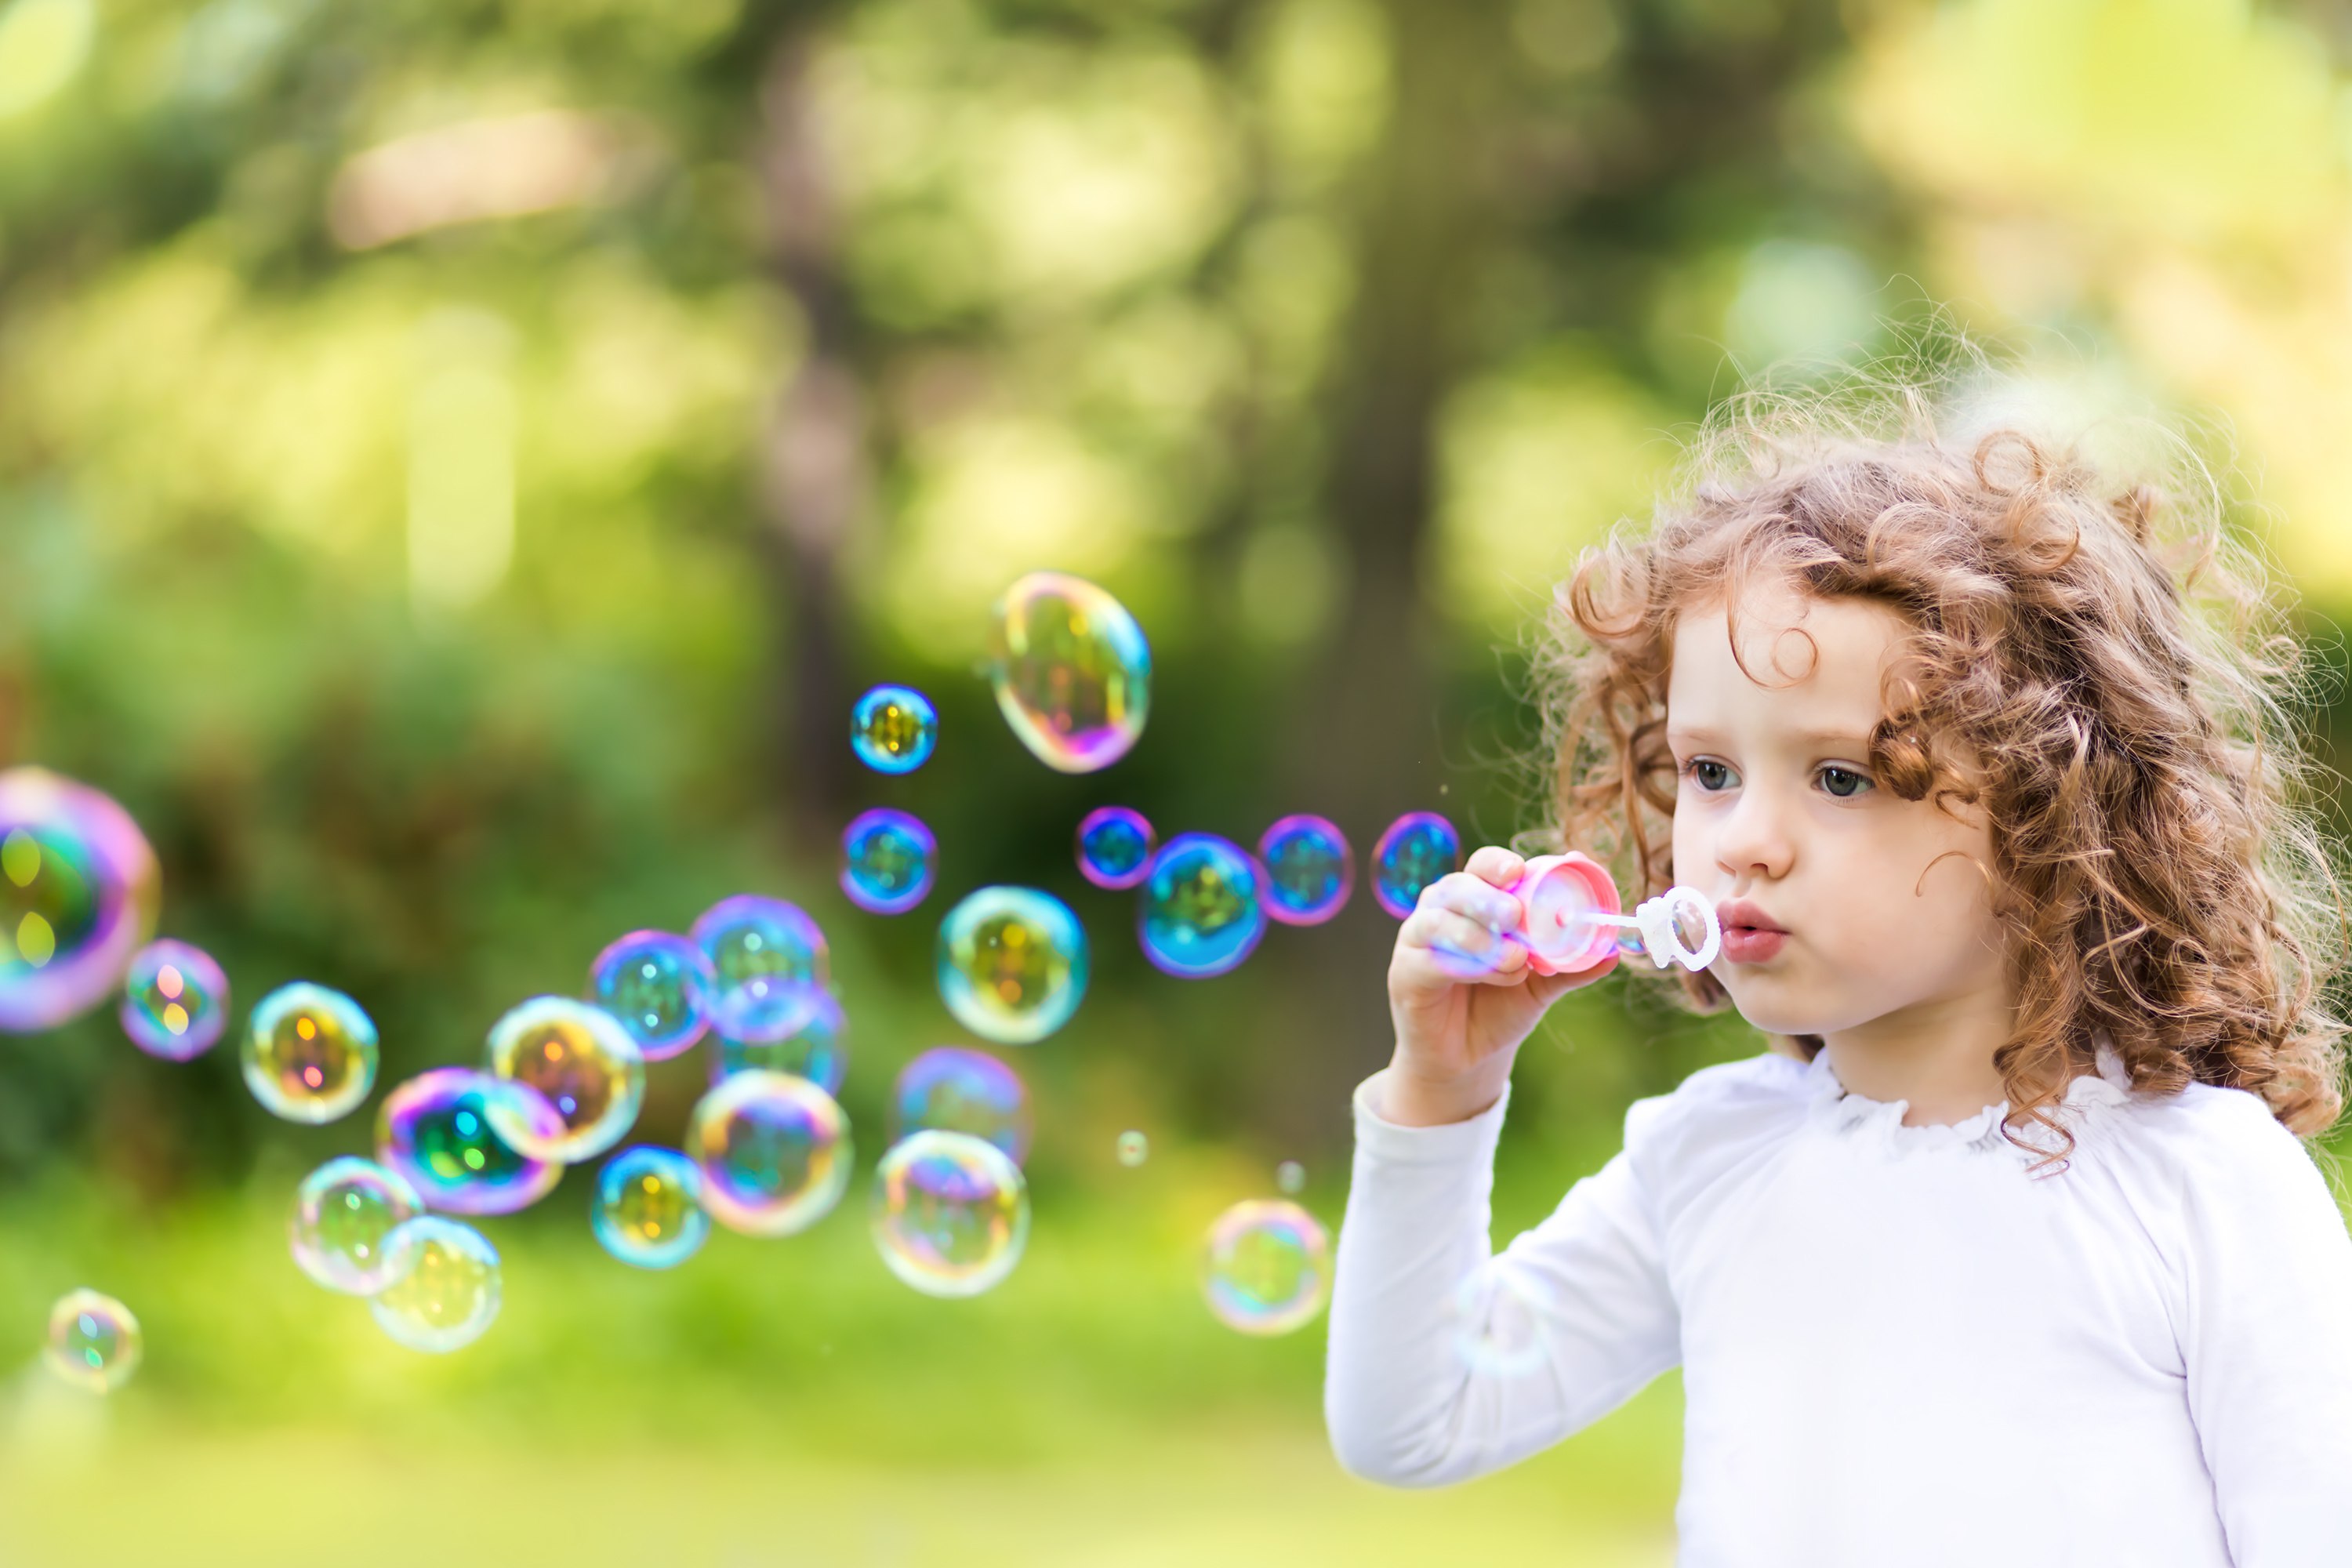 Getting Bubble Blowing Down to a Science - D-brief